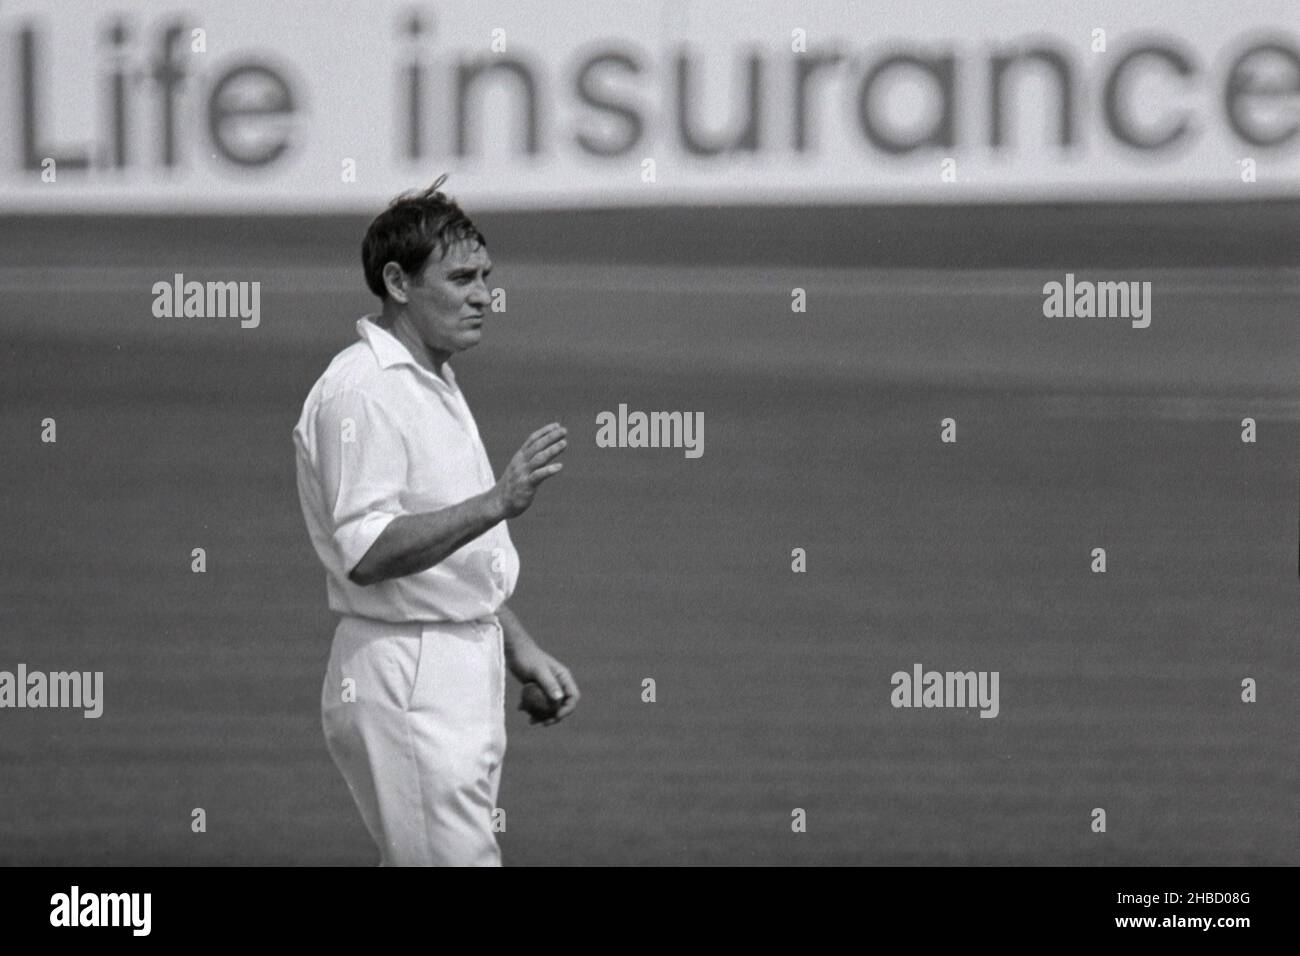 Ray Illingworth, Captain of Leicestershire in the John Player League (Sunday League, 40 overs) against Surrey, The Oval, 7 May 1978 Stock Photo